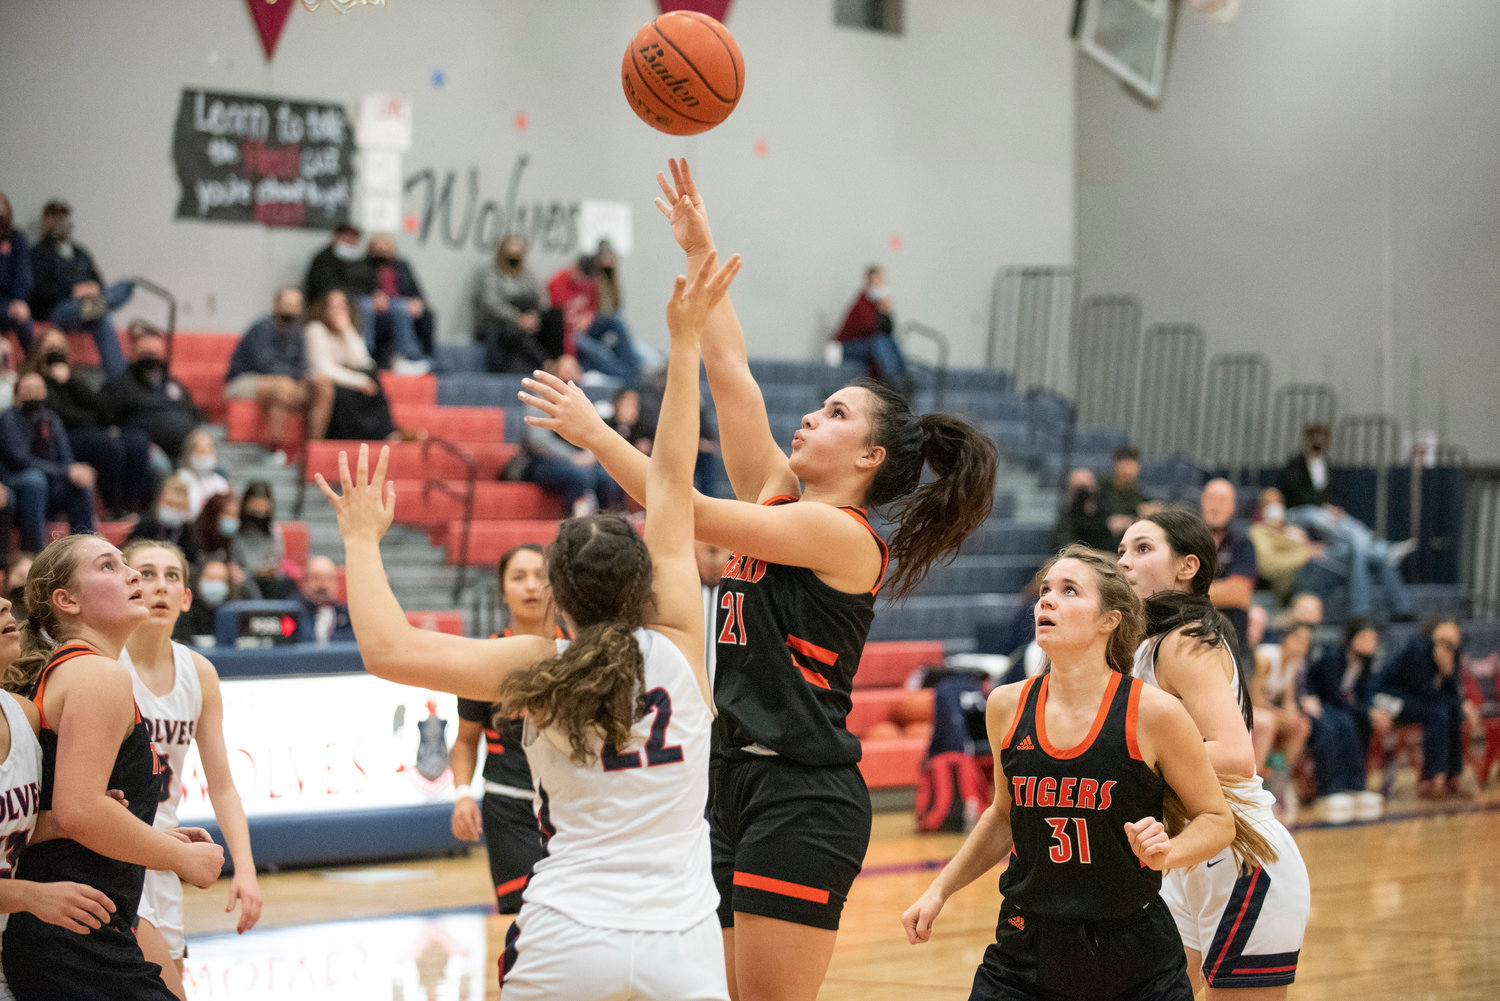 Centralia's Liliana Babka (21) puts up a shot in the paint against Black Hills on Dec. 17.